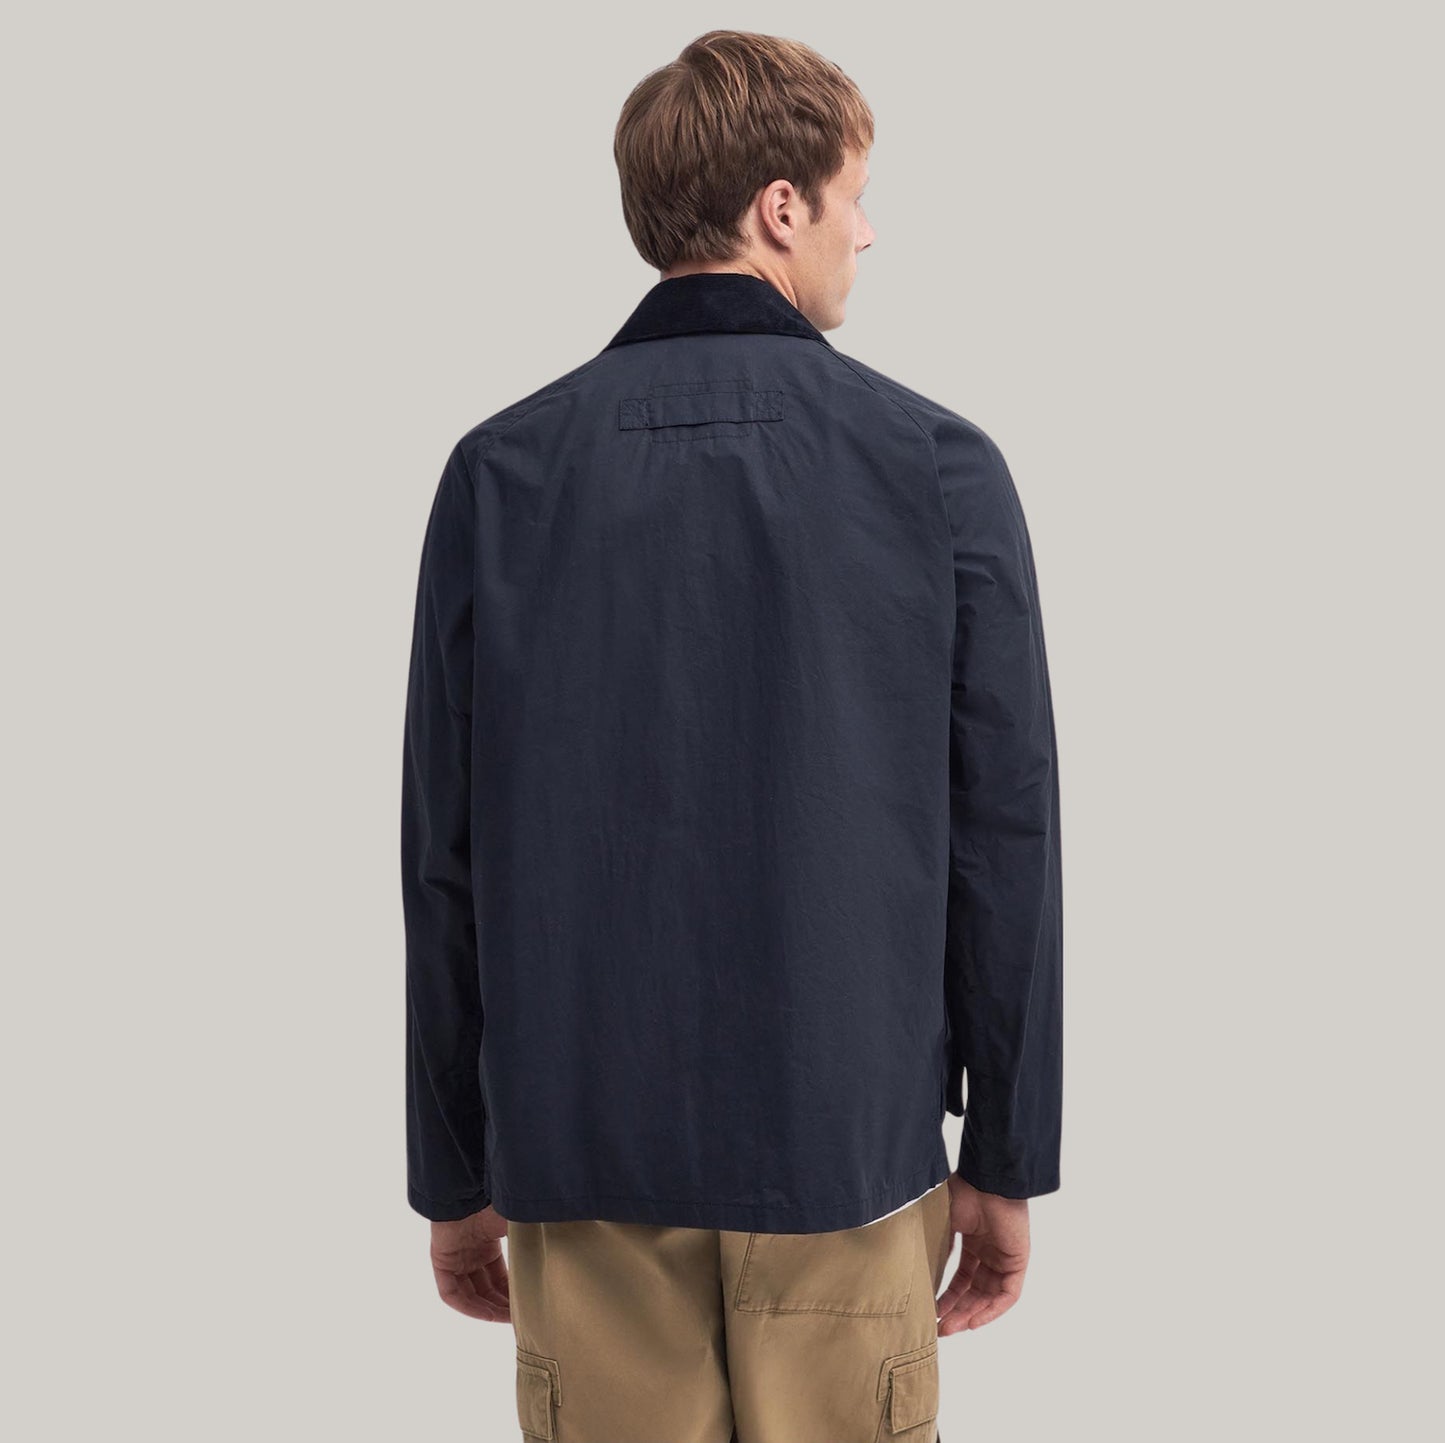 BARBOUR MODIFIED TRANSPORT CASUAL JACKET - DARK NAVY